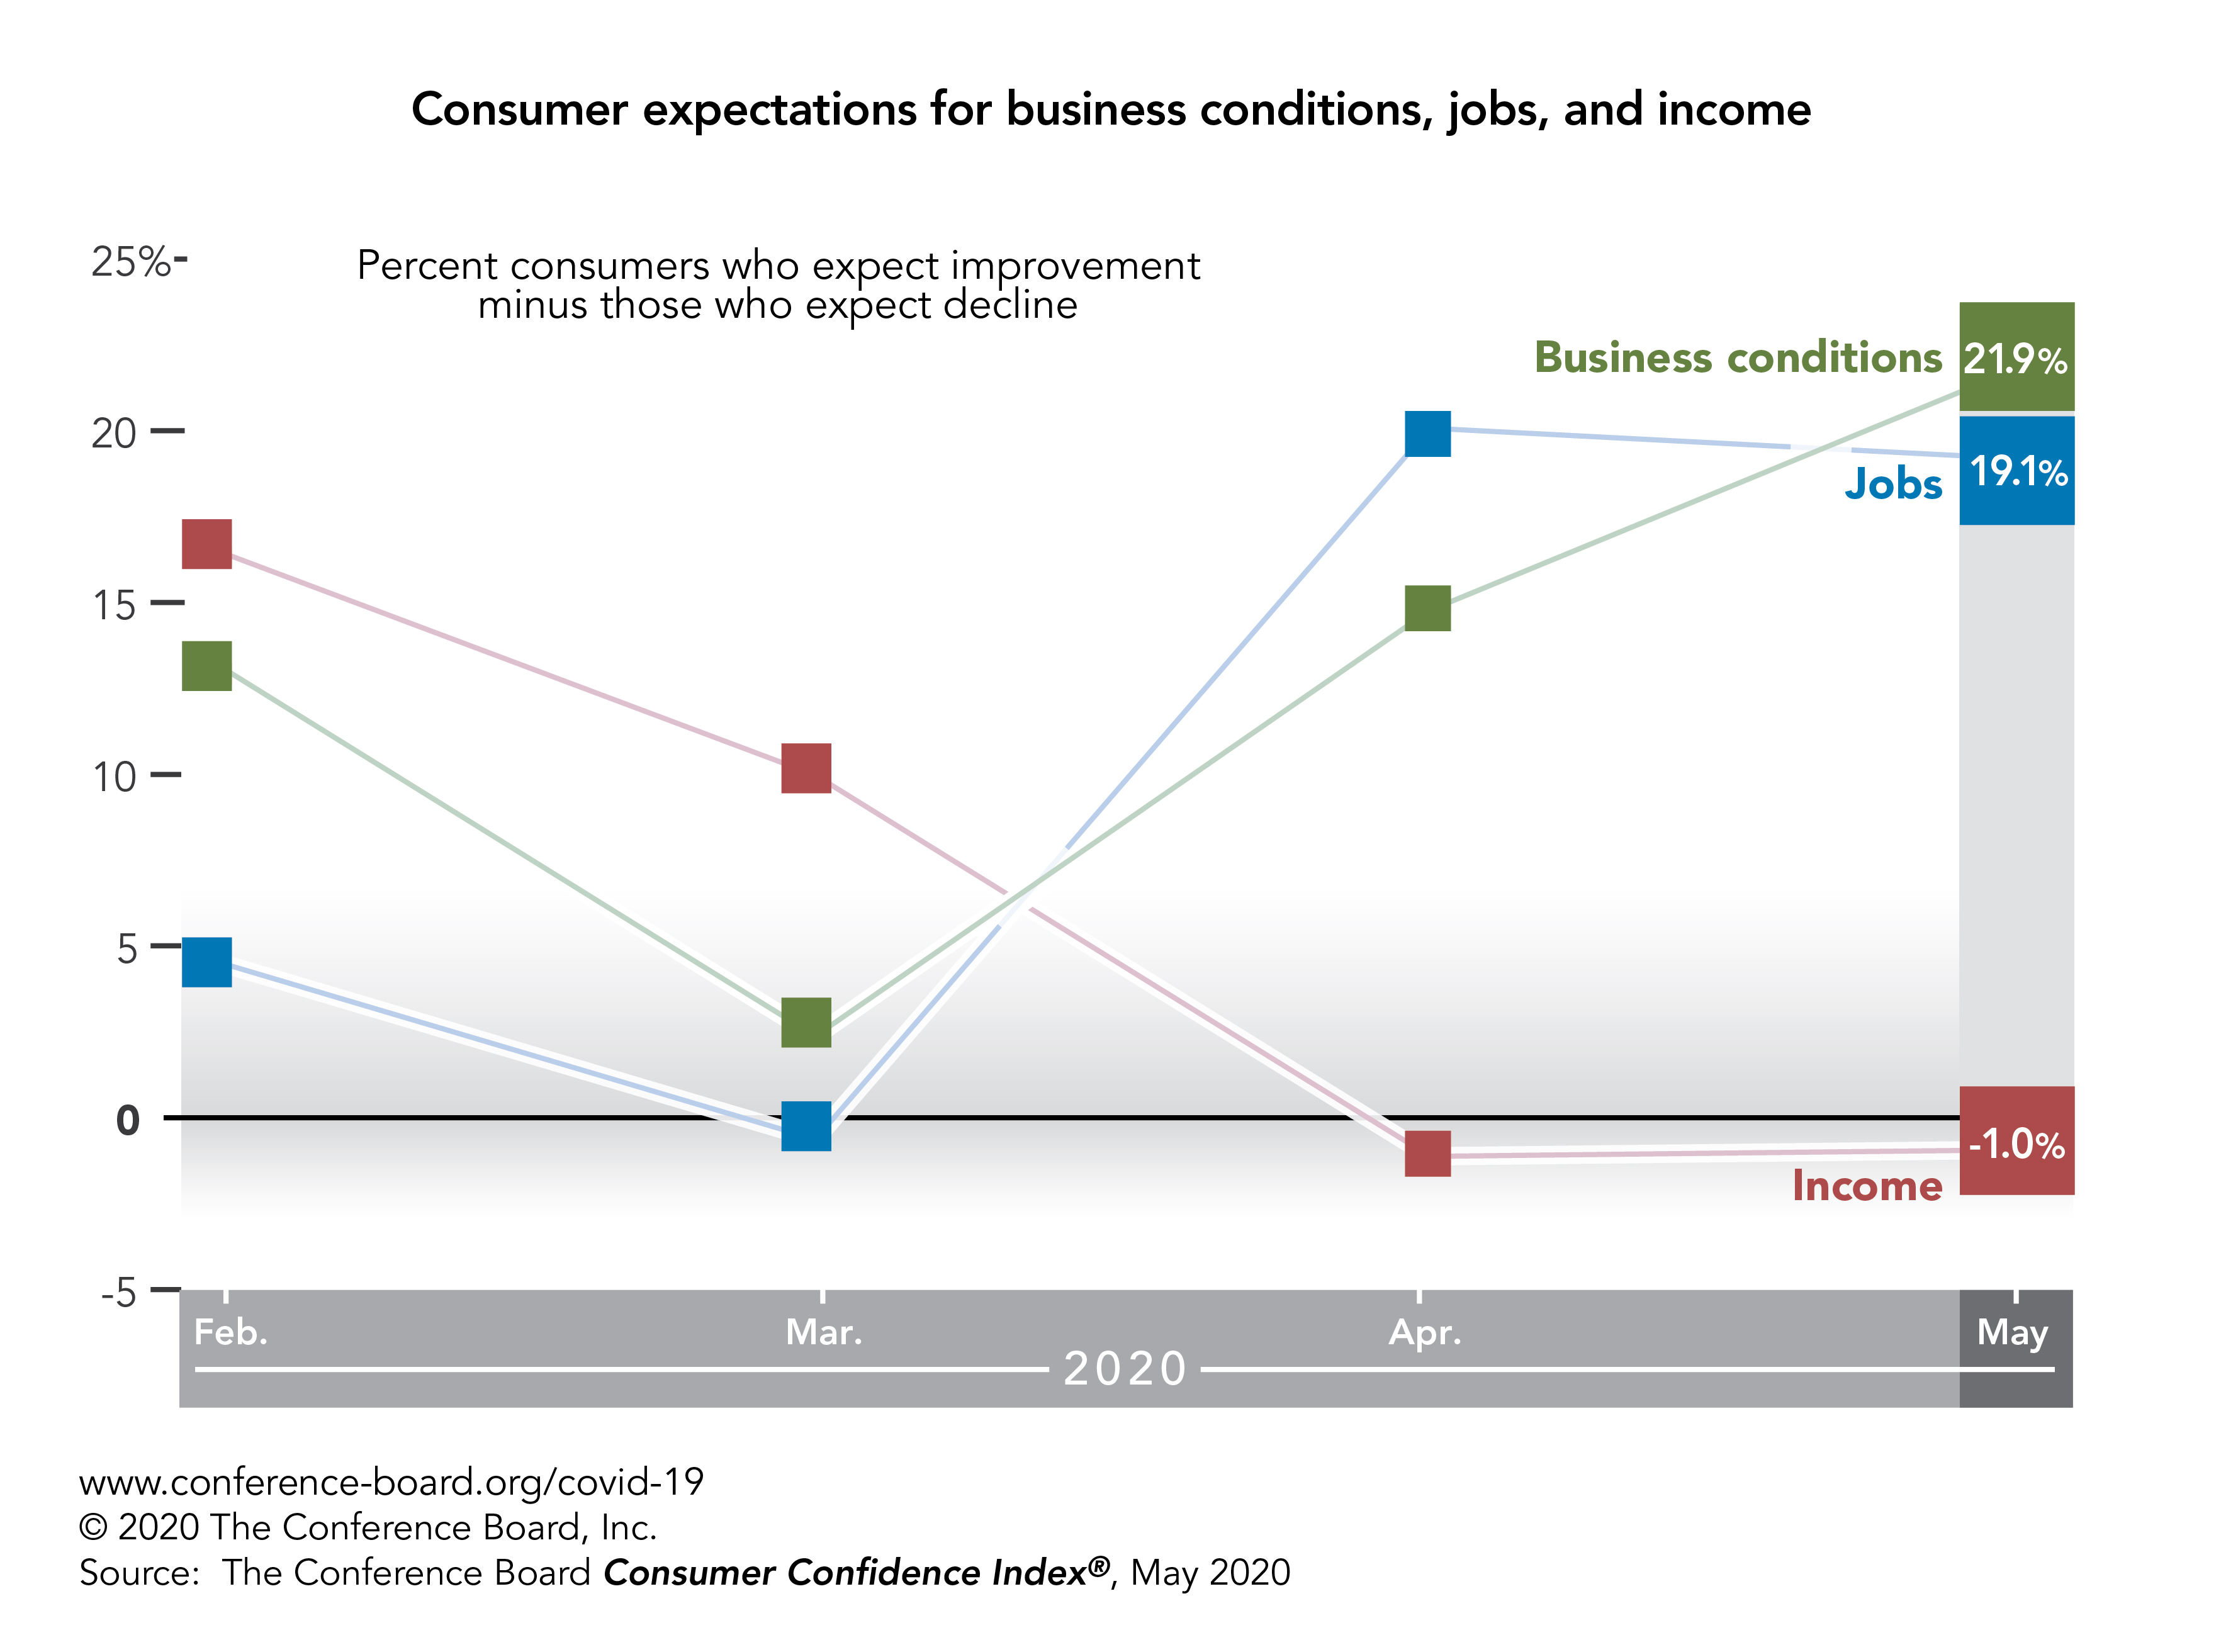 Reopening of economy stabilizes consumer confidence but concern remains about income